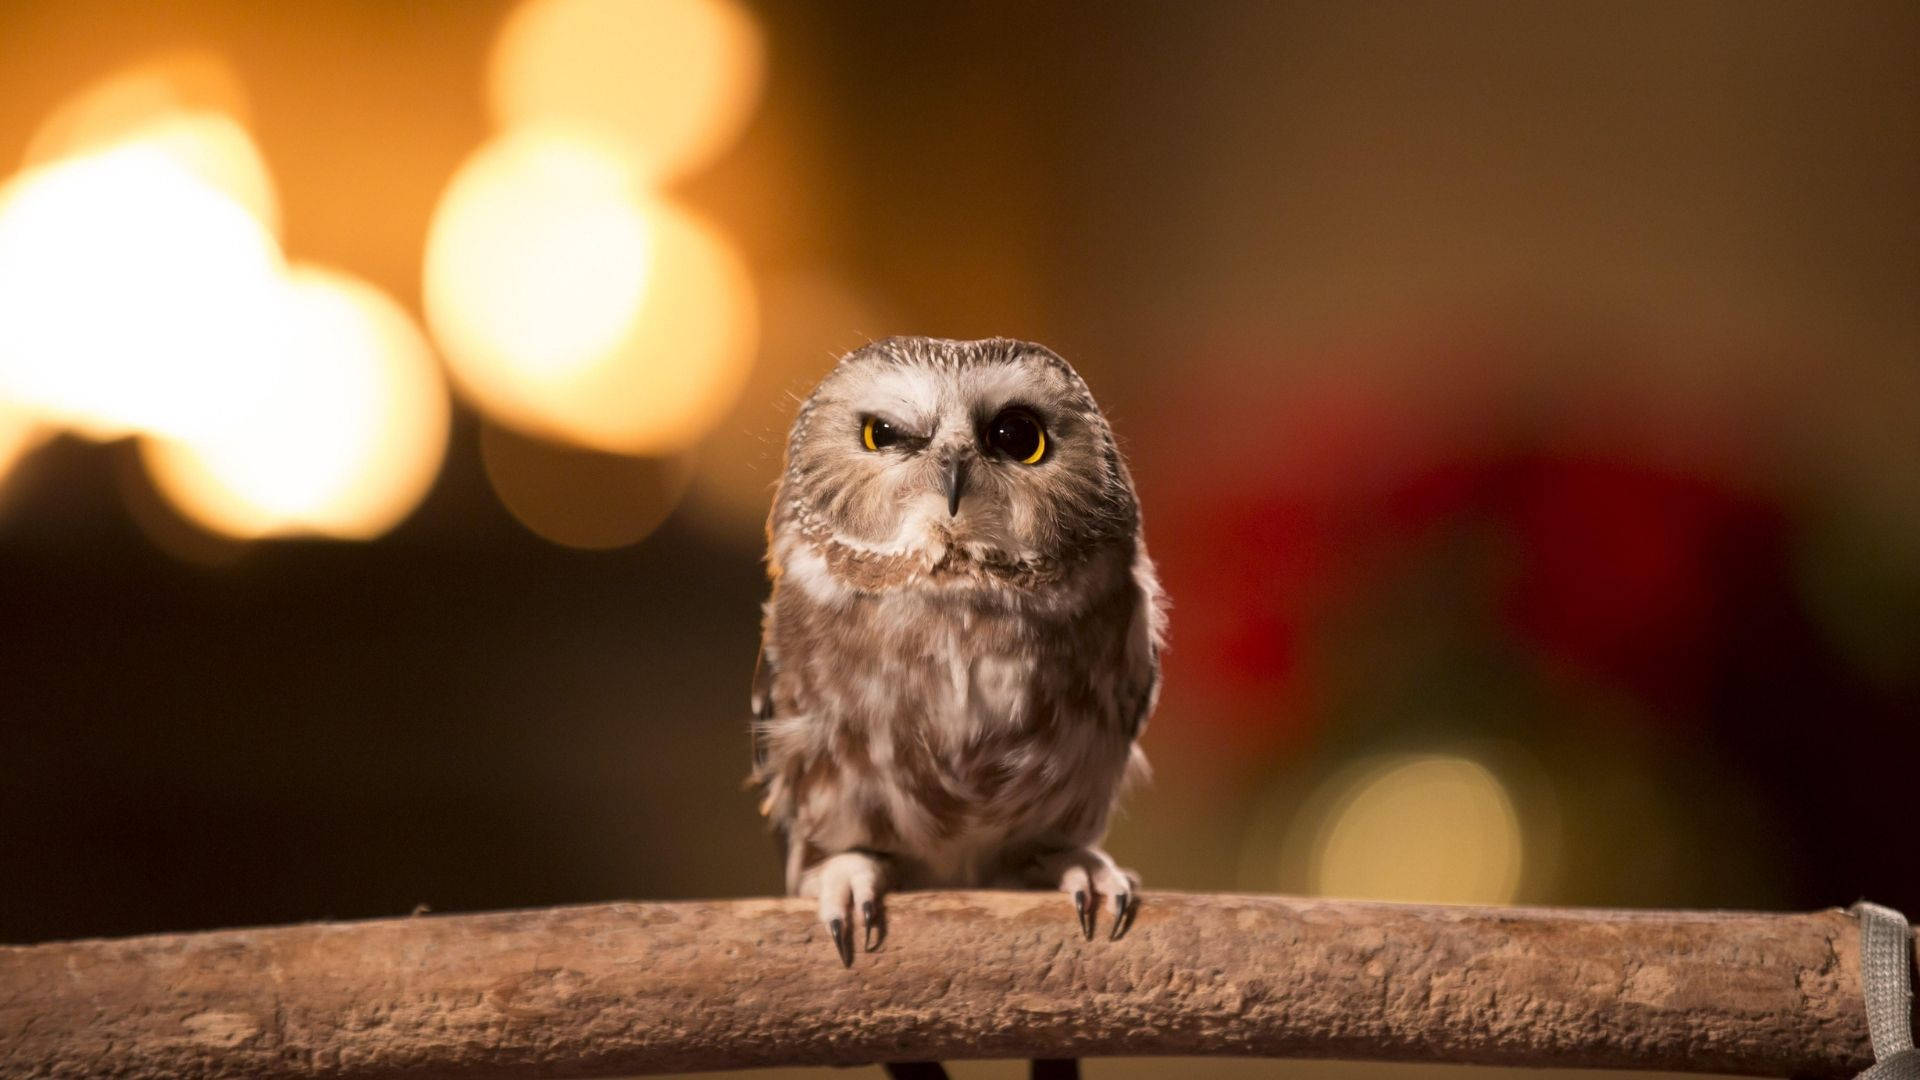 Baby Owl On Long Stick